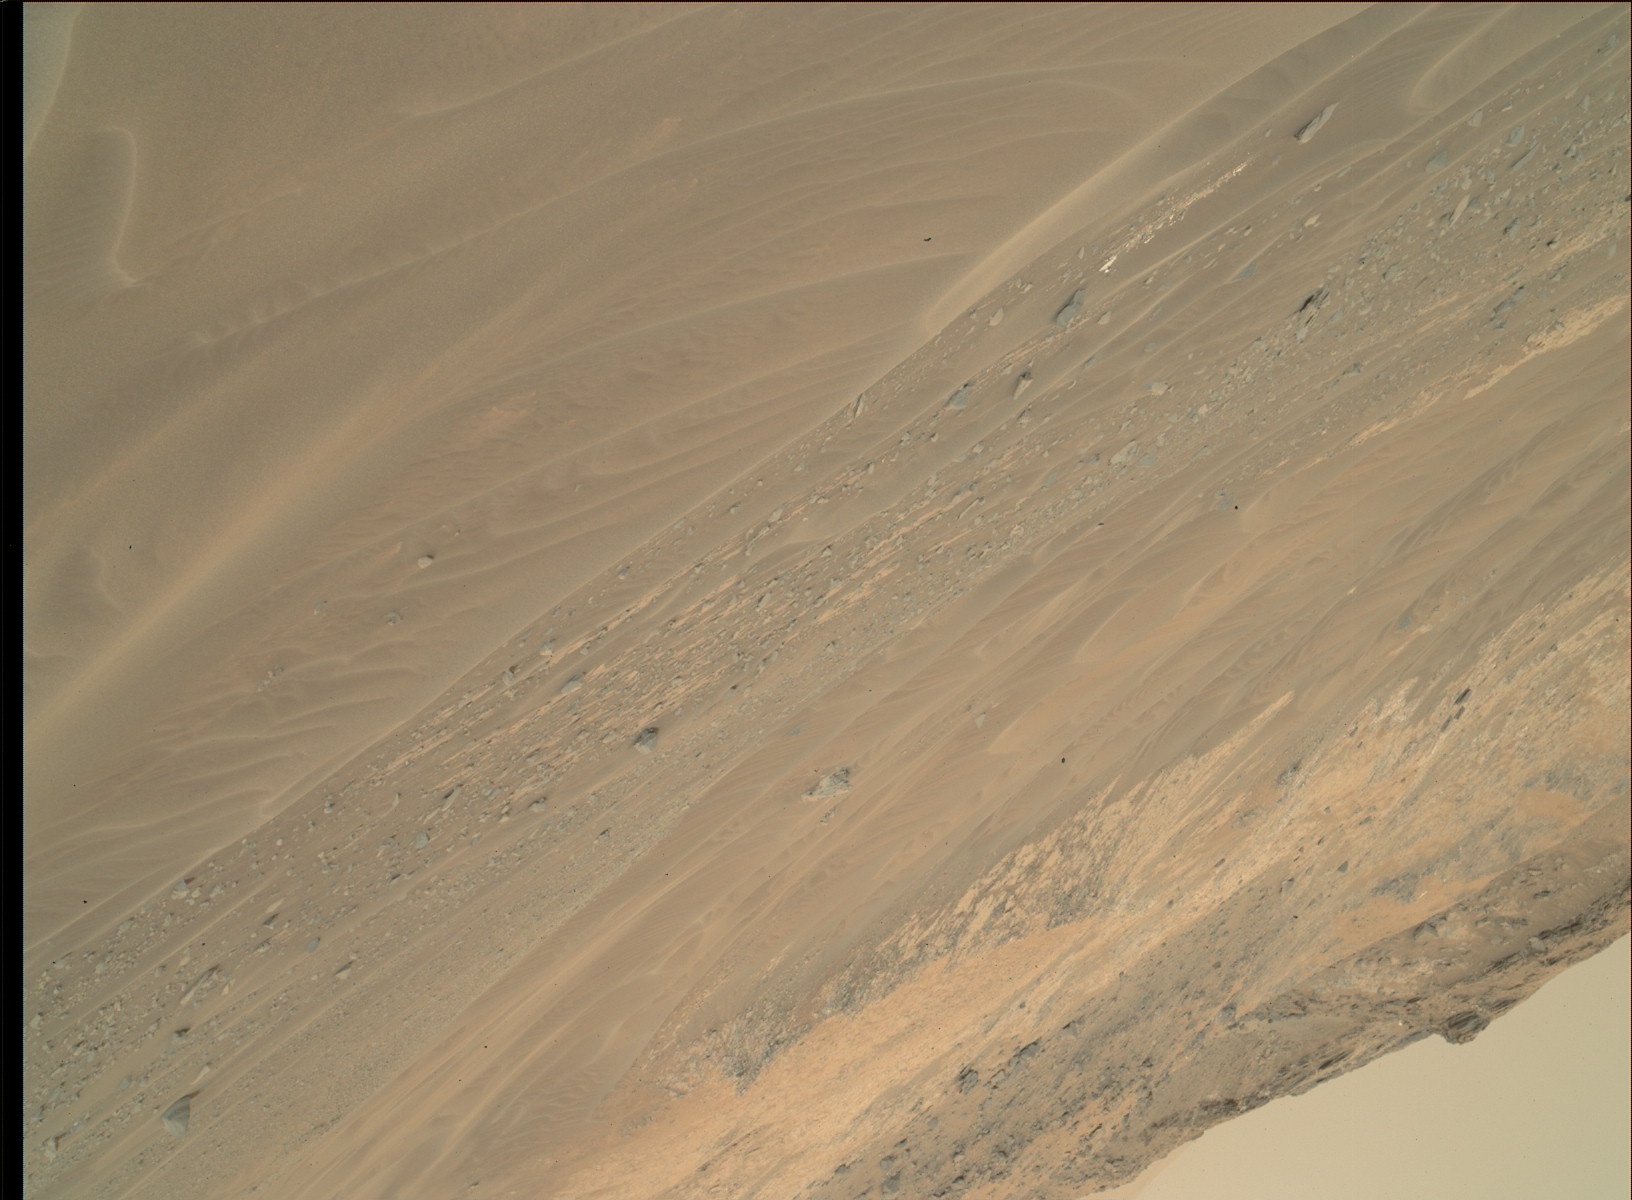 Nasa's Mars rover Curiosity acquired this image using its Mars Hand Lens Imager (MAHLI) on Sol 983